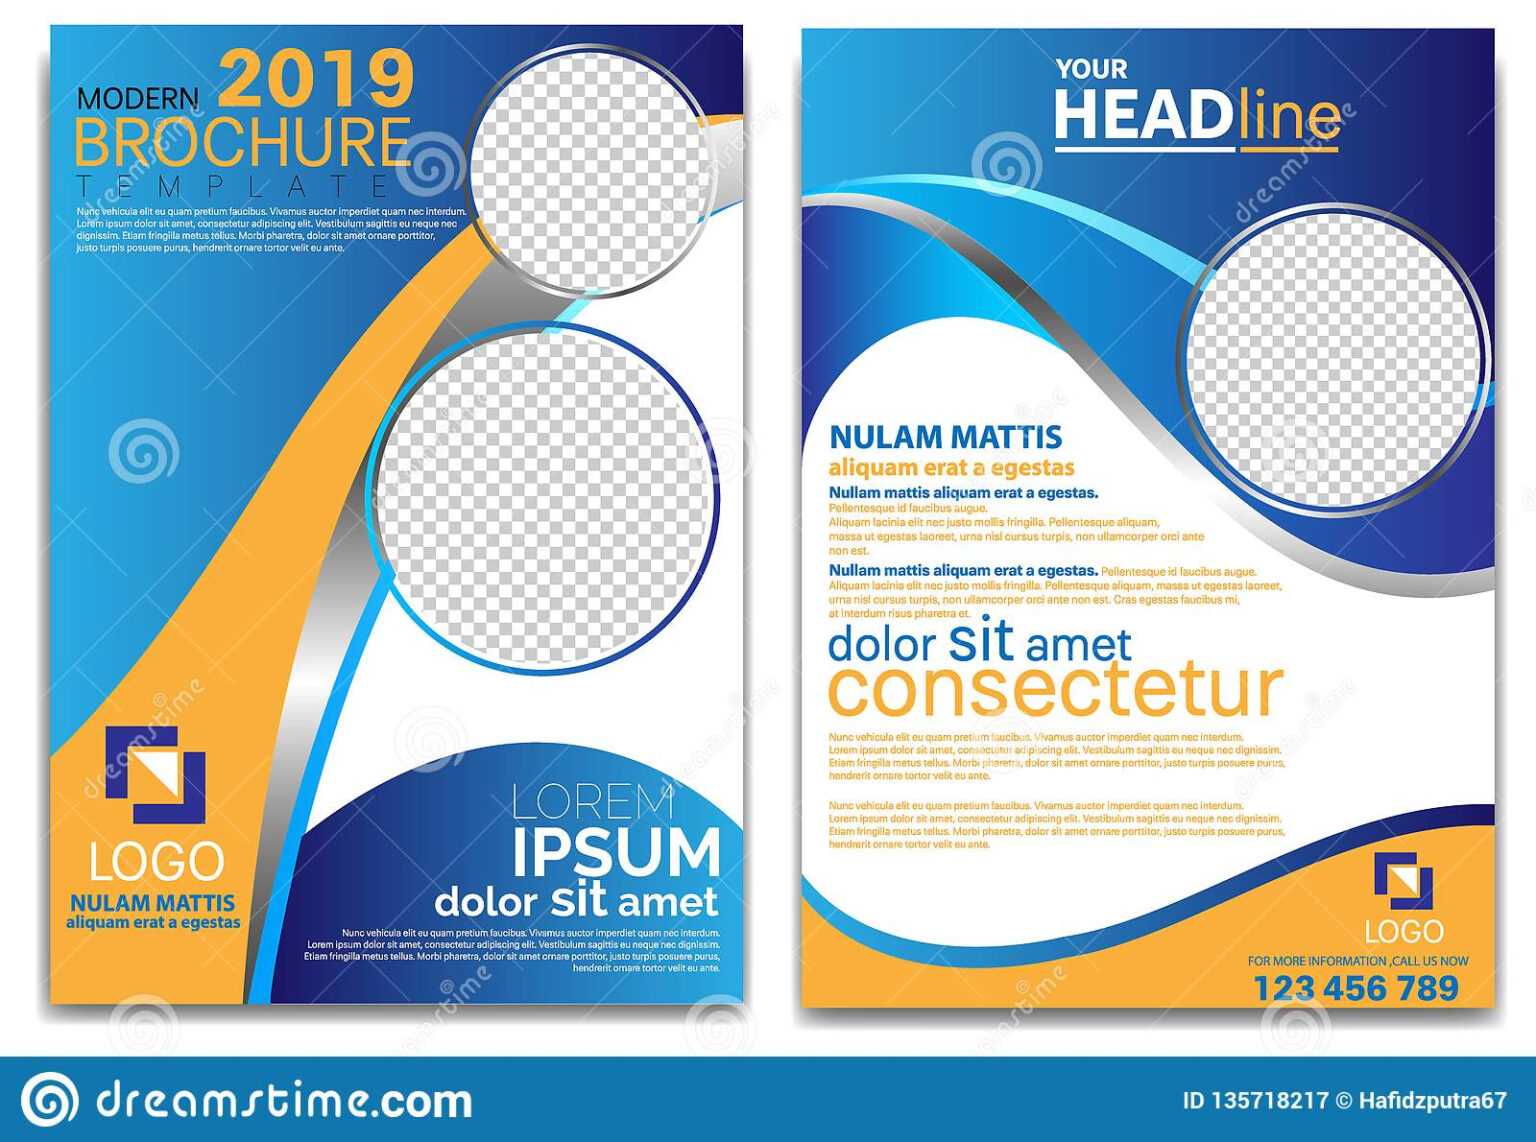 Modern Brochure Template 2019 And Professional Brochure Throughout